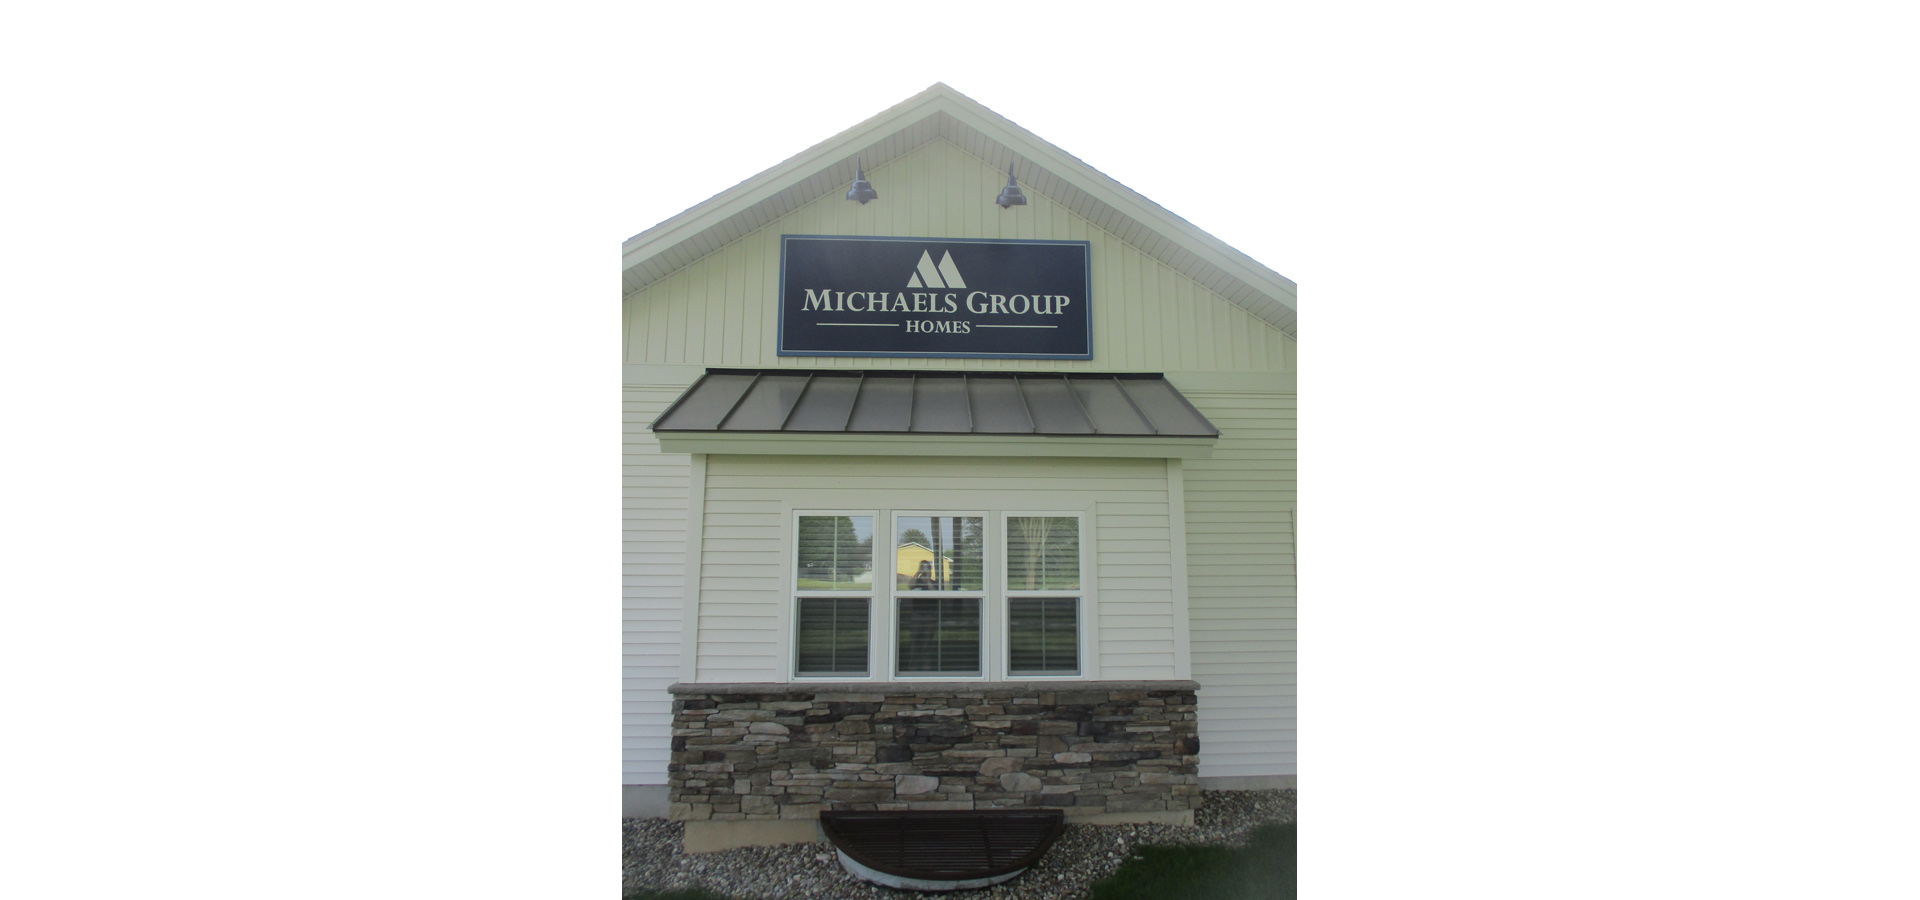 Michaels Group Homes Office Location in Mechanicville, NY